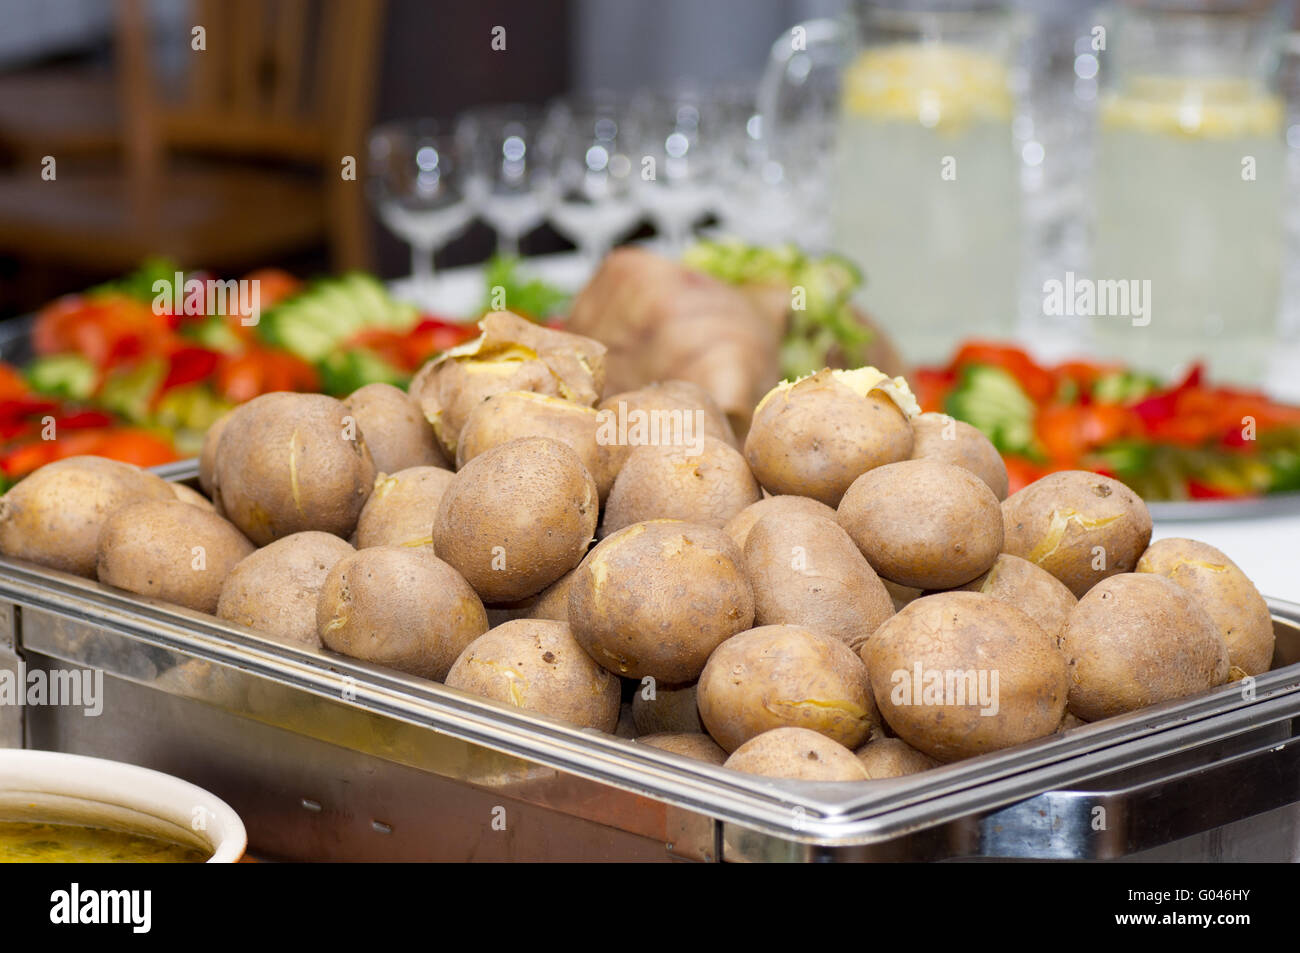 Peel potatoes served in marmites. Lithuanian banquet. Stock Photo